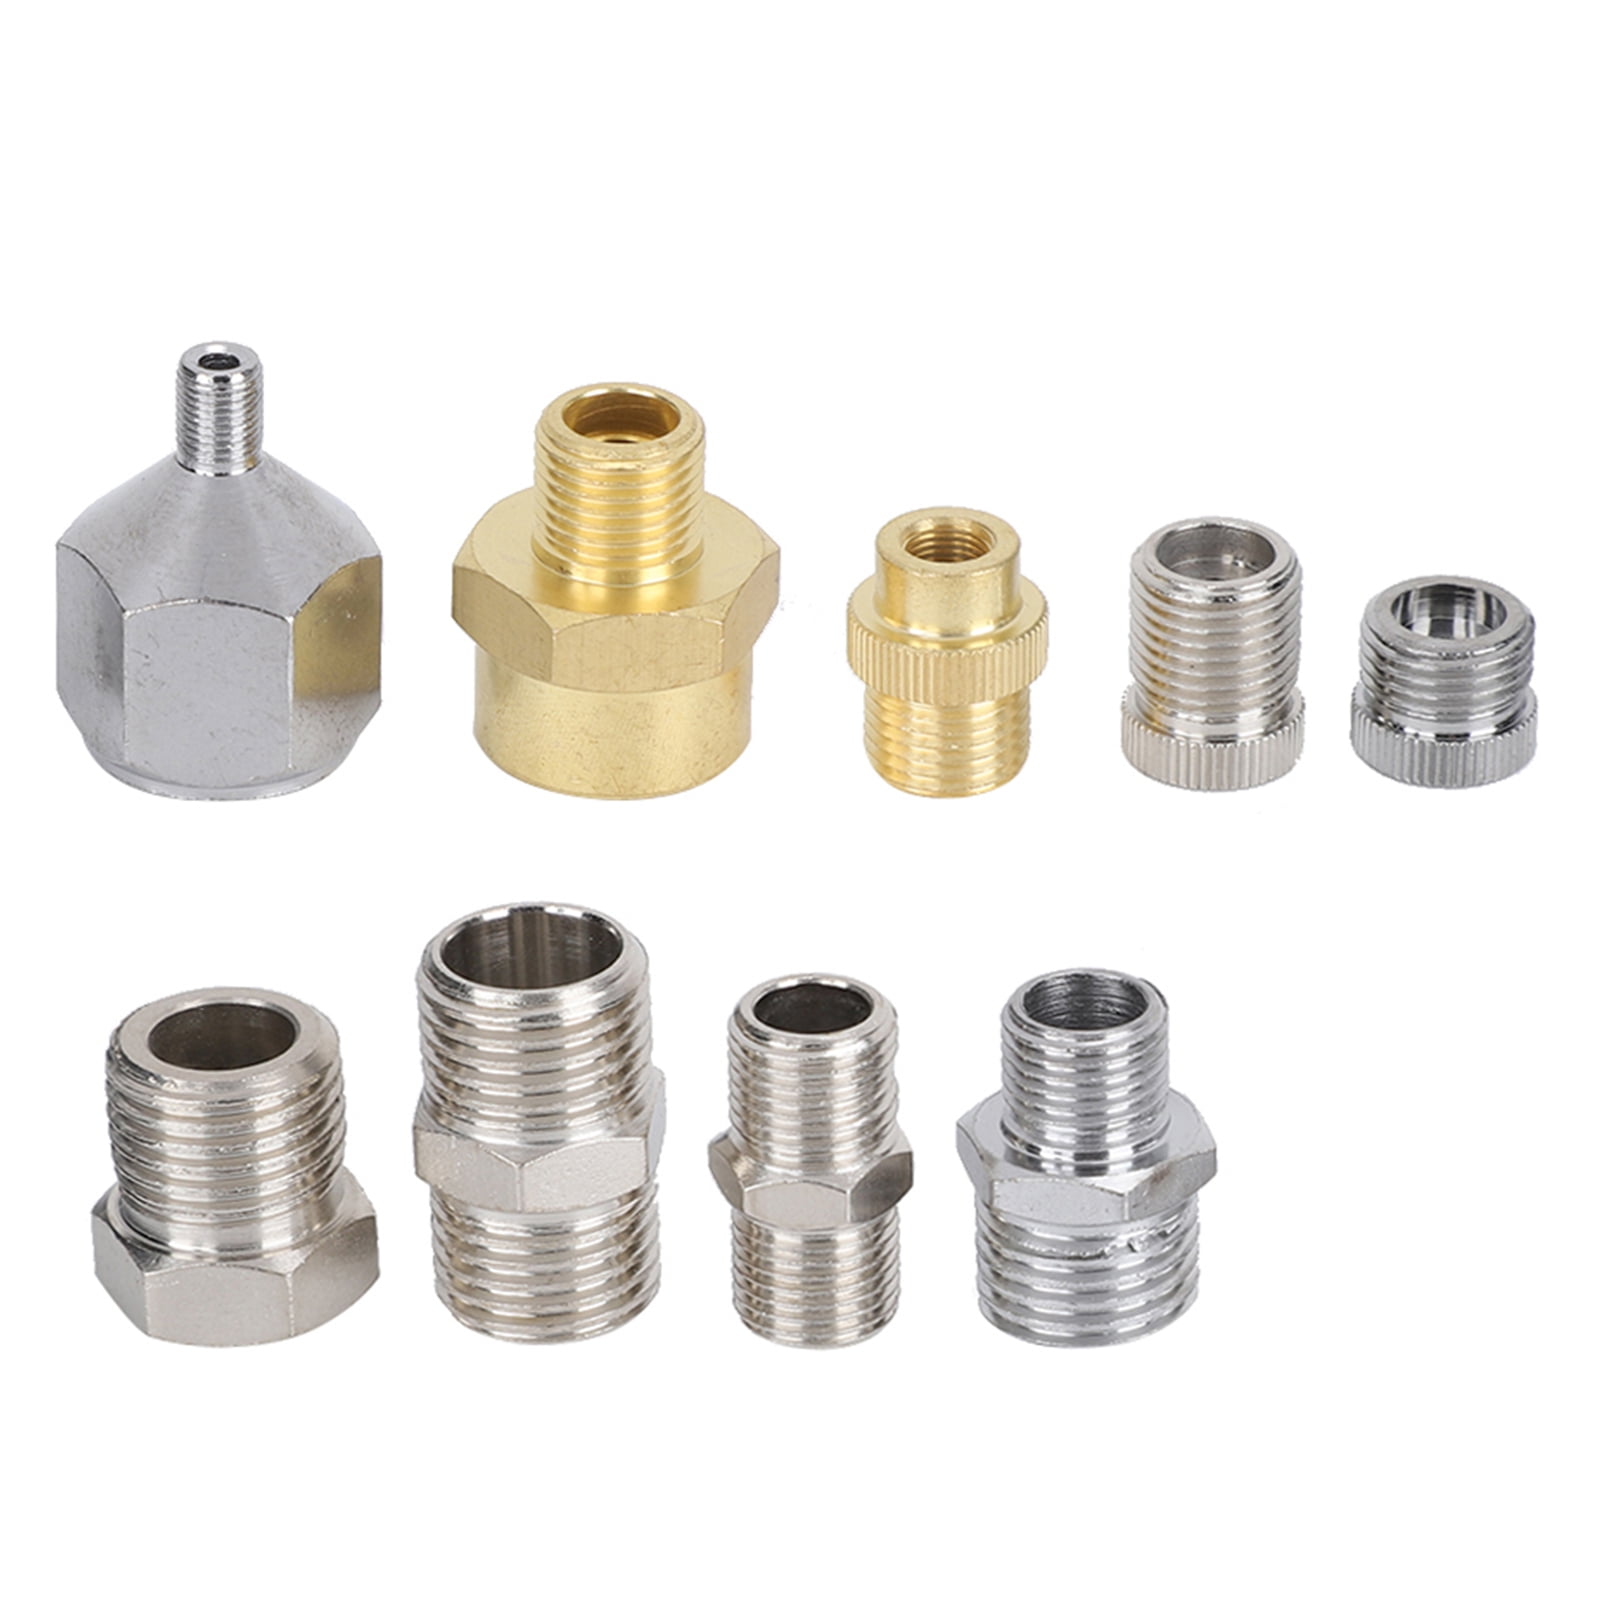 9pcs Airbrush Adapter Kit Fitting Connector Set For Compressor Airbrush Air Hose